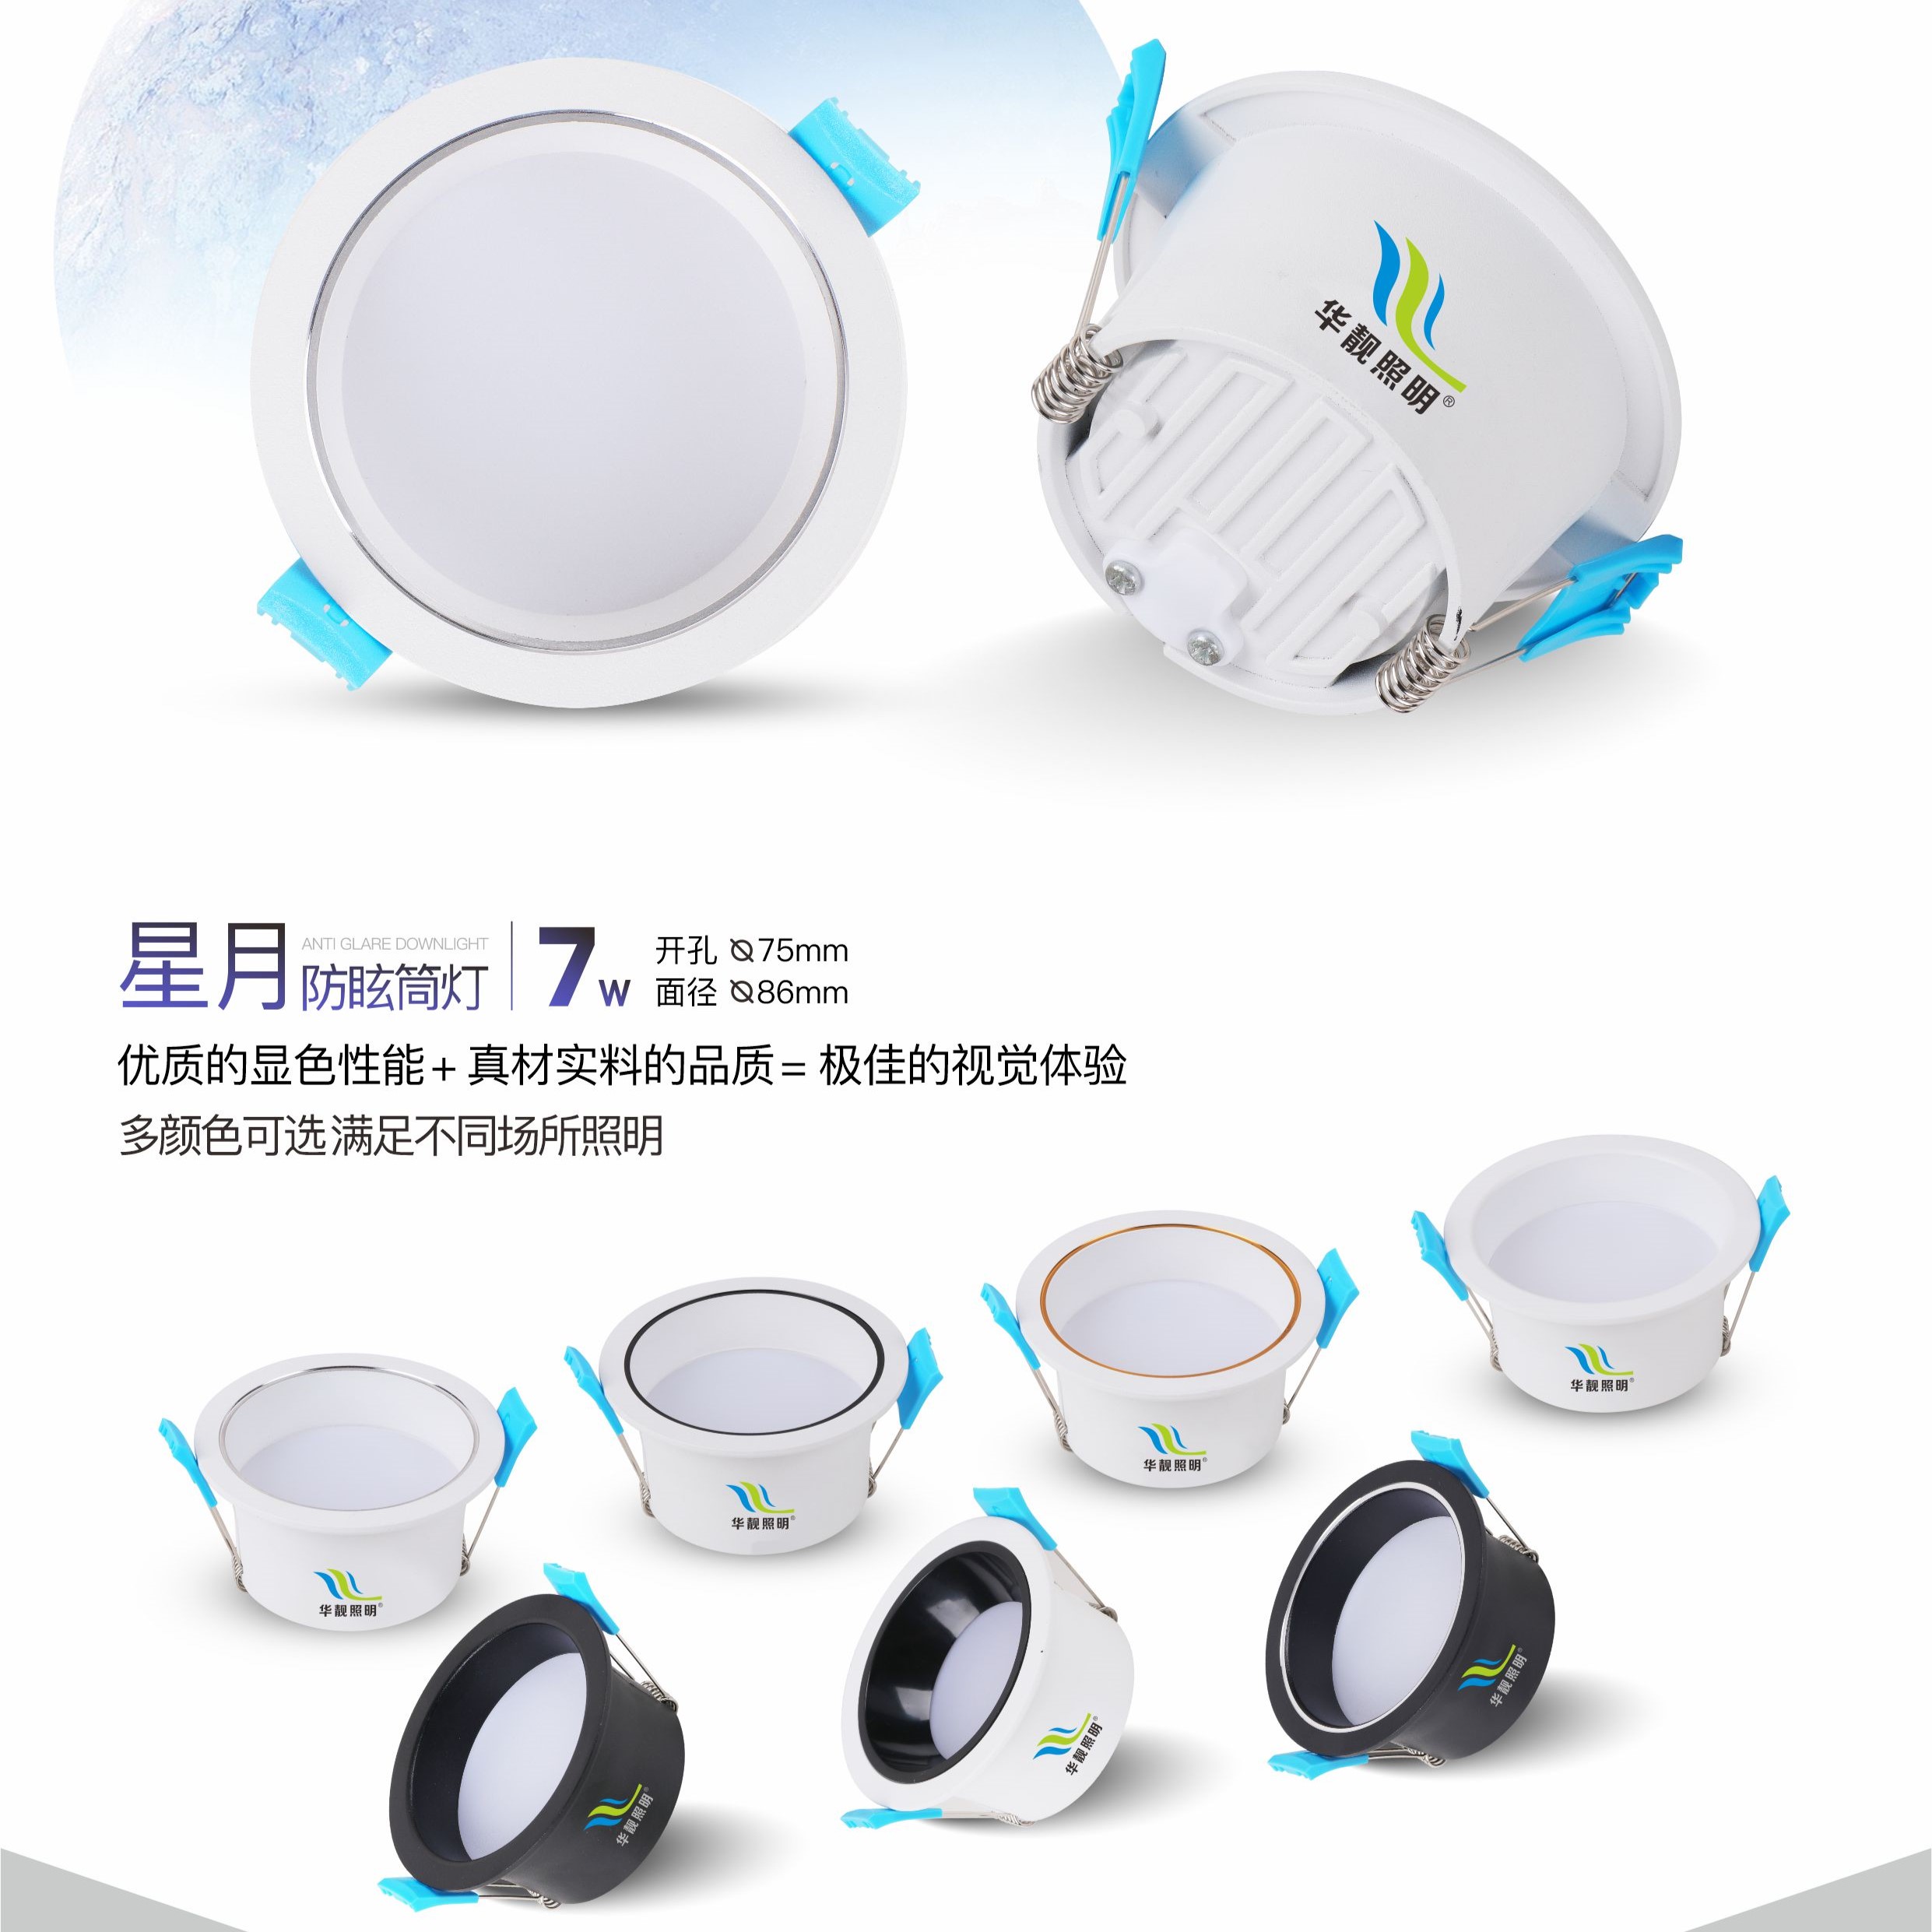 High end chip with high lumen and high display, pointing star and moon anti glare down light